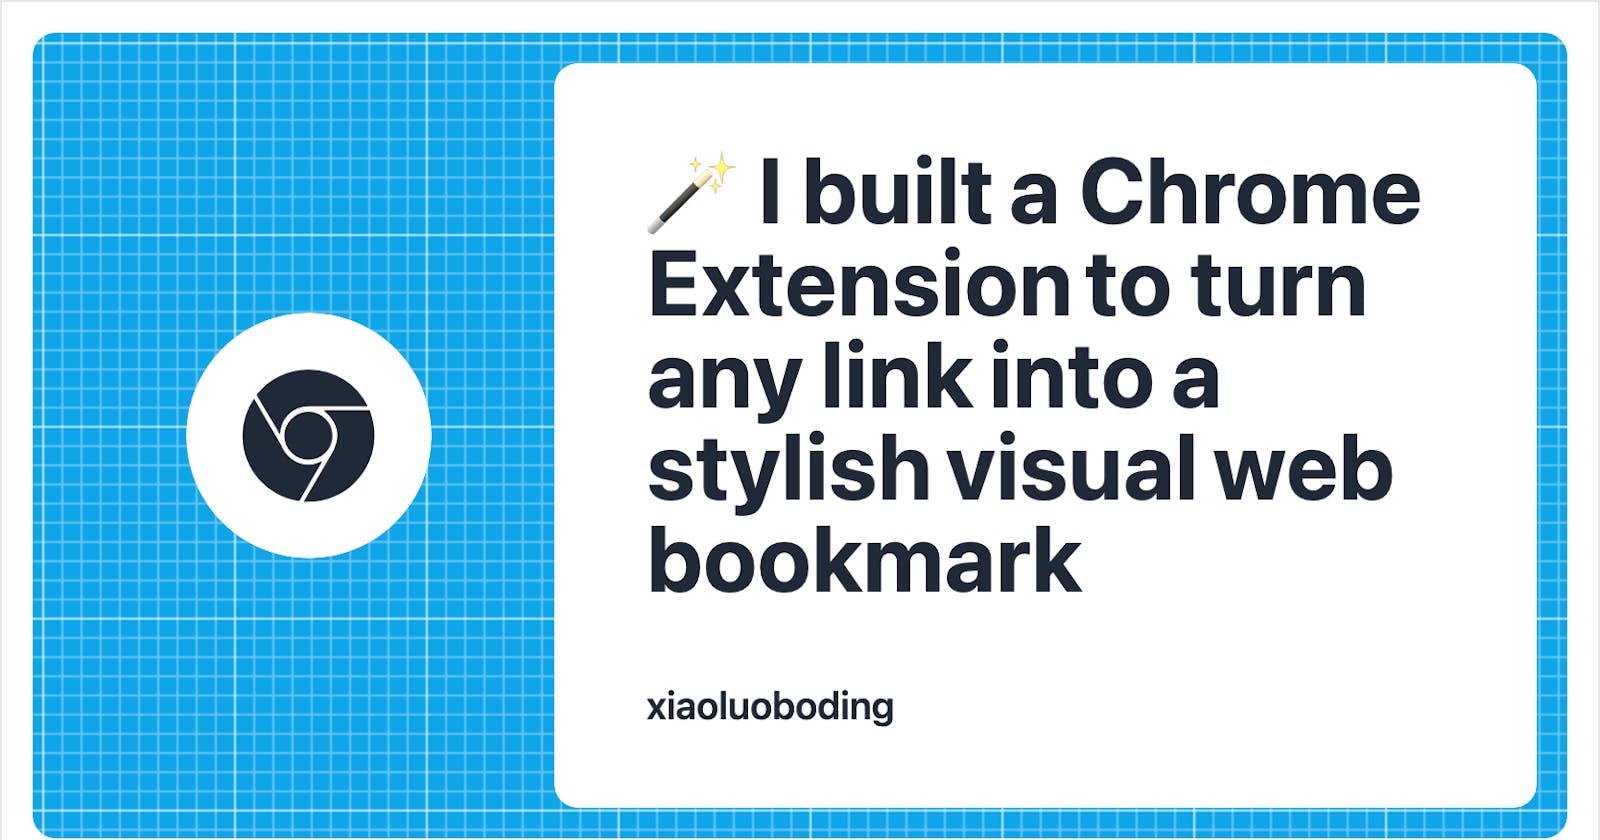 I built a Chrome Extension to turn any link into a stylish visual web bookmark